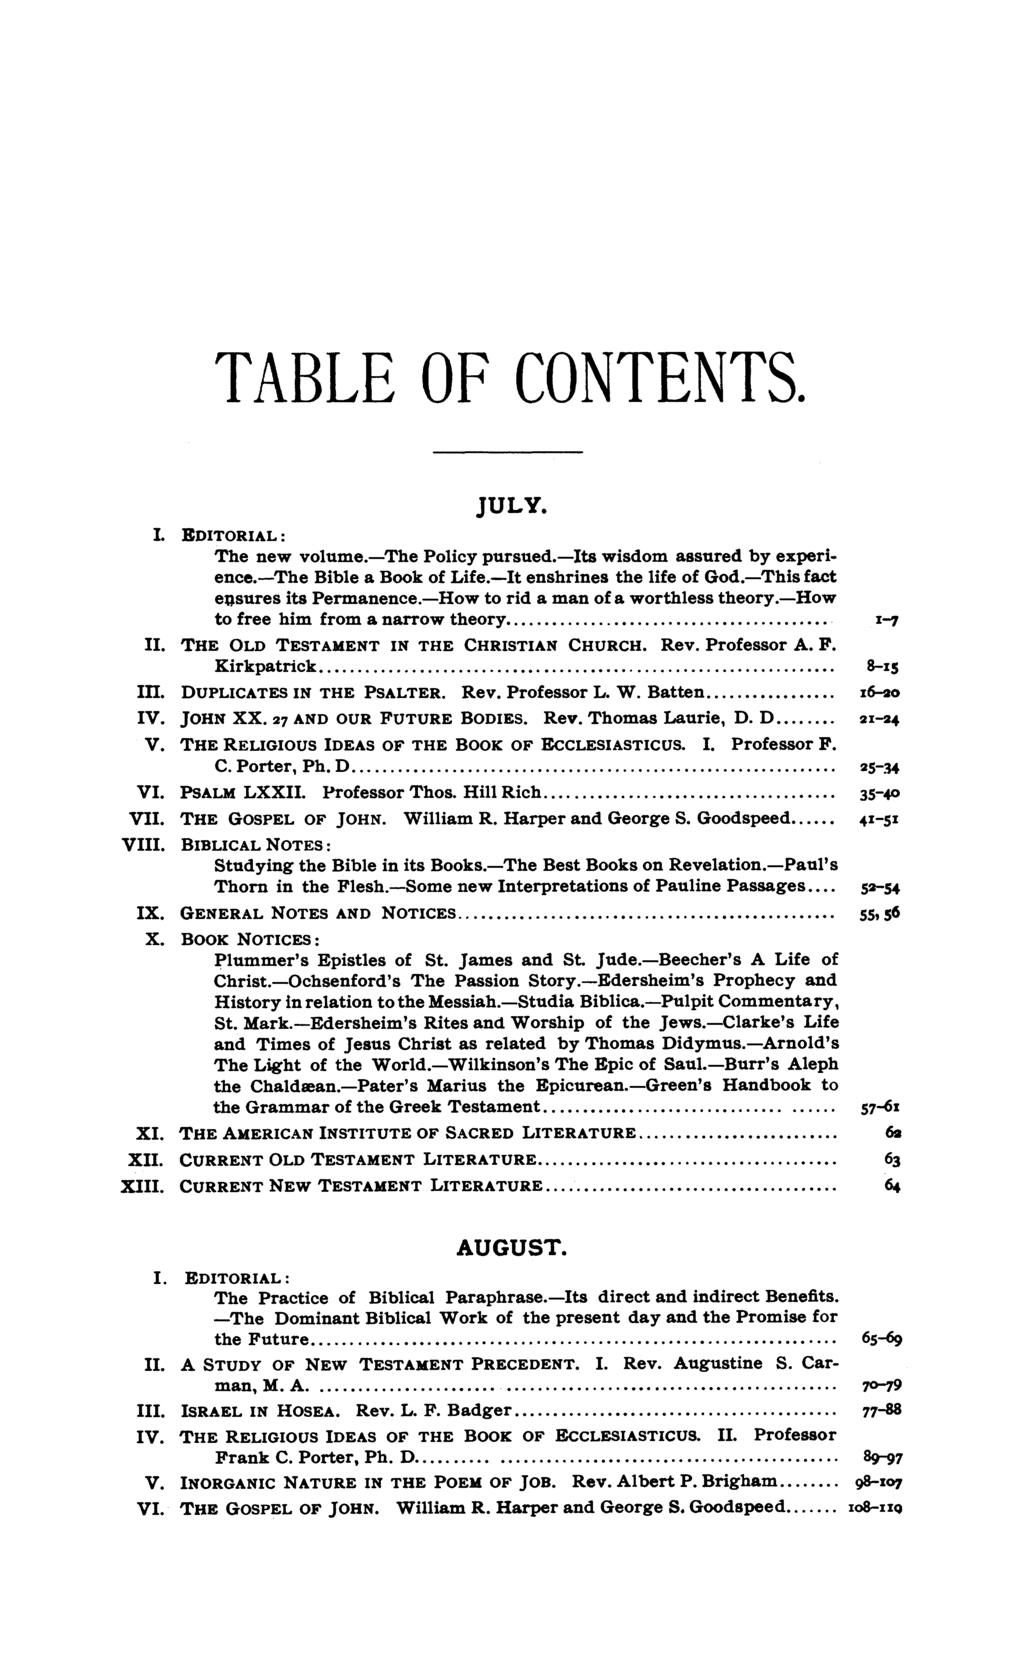 TABLE OF CONTENTS. JULY. The new volume.-the Policy pursued.-its wisdom assured by experience.-the Bible a Book of Life.-It enshrines the life of God.-This fact ensures its Permanence.